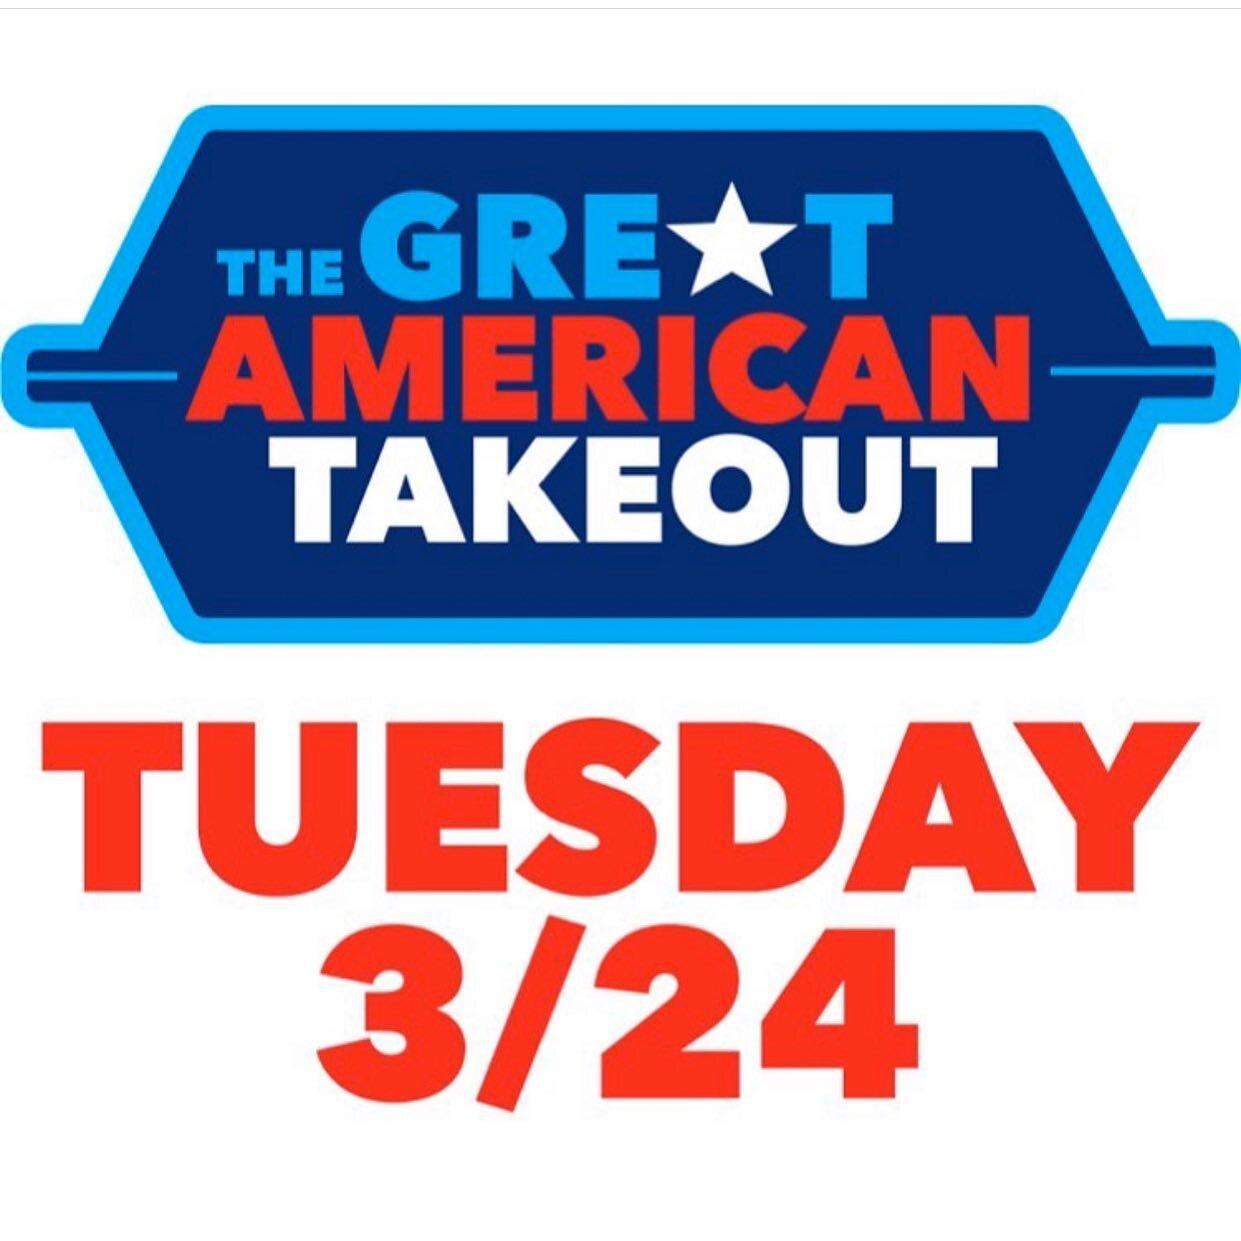 This is TODAY! 🇺🇸 a few of my favorite places that would LOVE to get your #takeout order:
@thegallerywestlake 
@eatatcronies 
@brentsdeli 
@eatatbasta 
These are LOCAL BUSINESSES owned by people in our community. And come on now, you gotta be tired